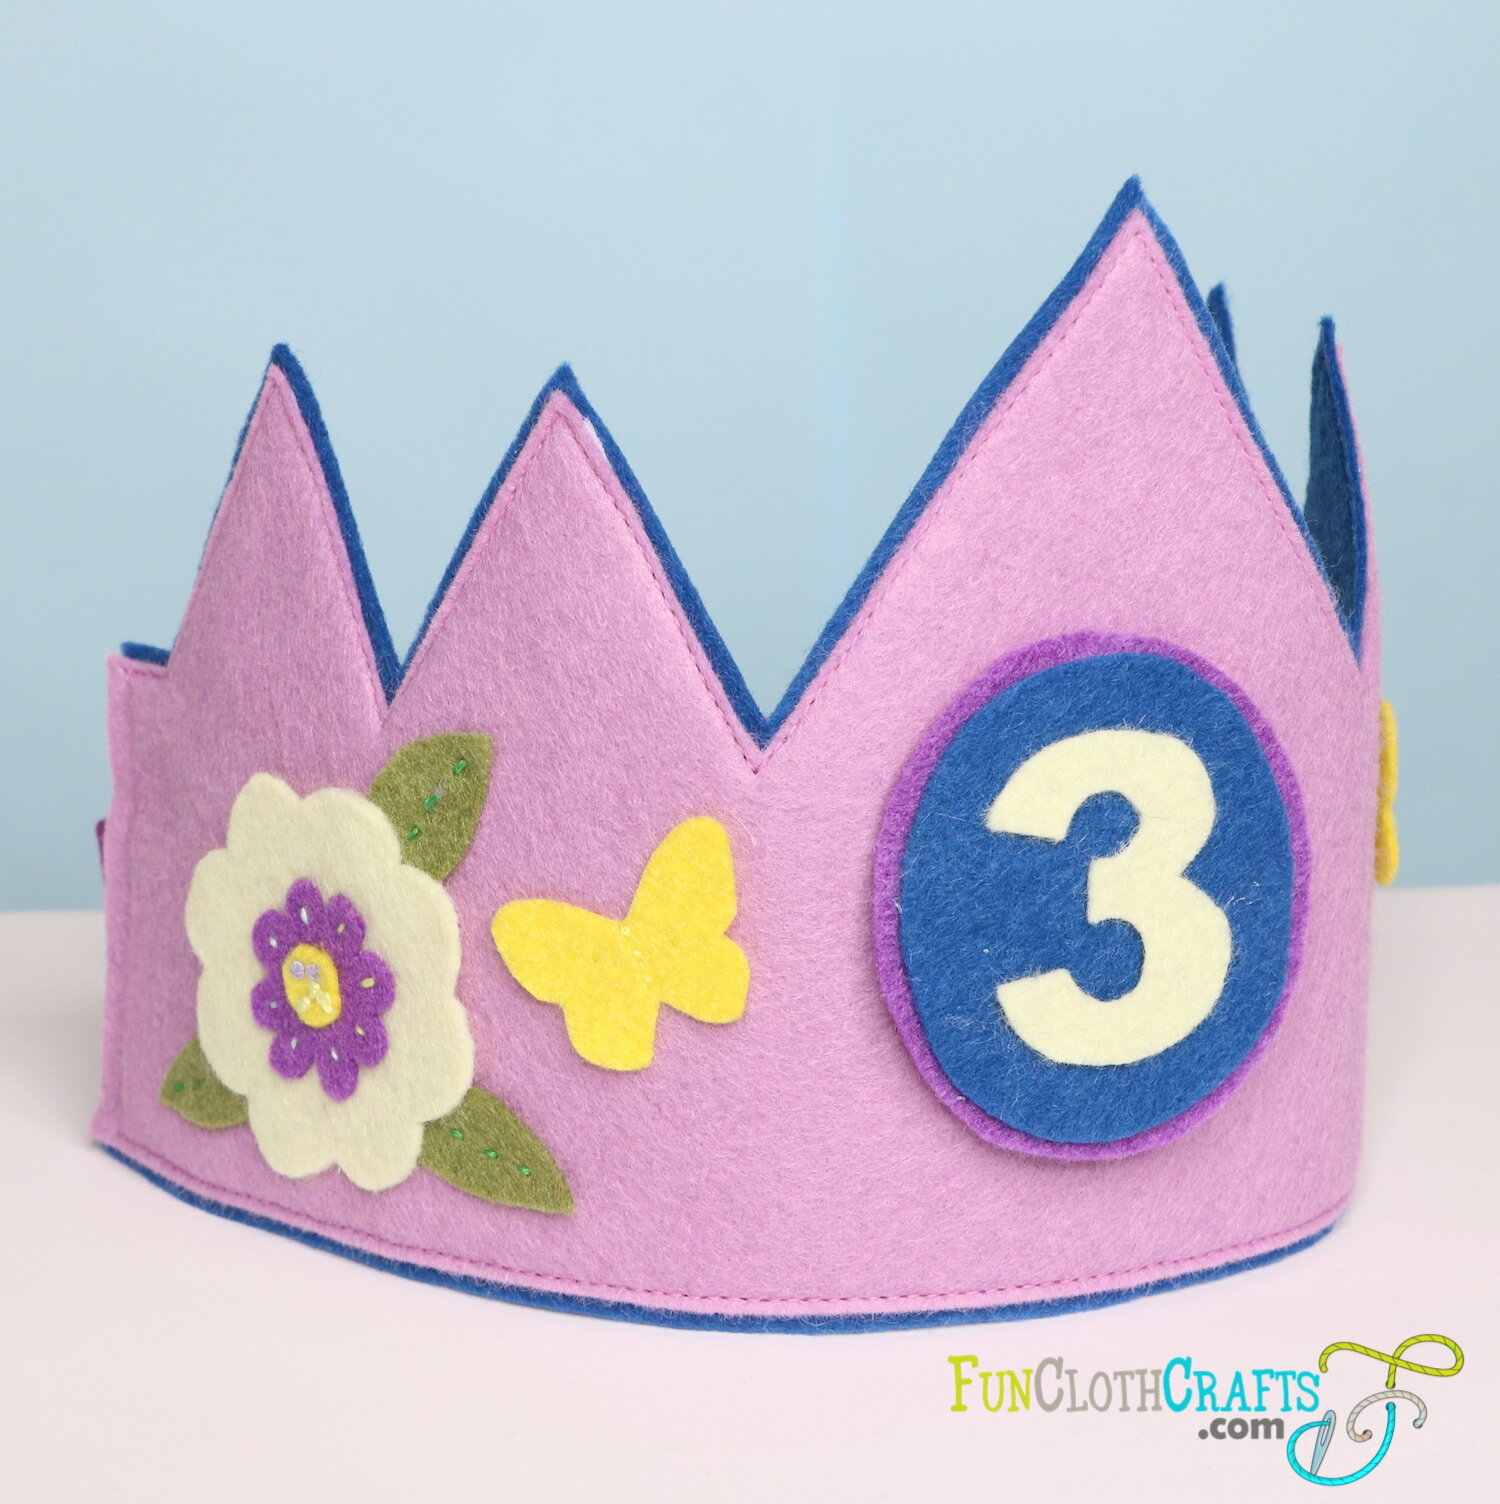 How To Make a DIY Birthday Crown with a Crown Template | Fun Cloth Crafts -  Felt Craft Patterns